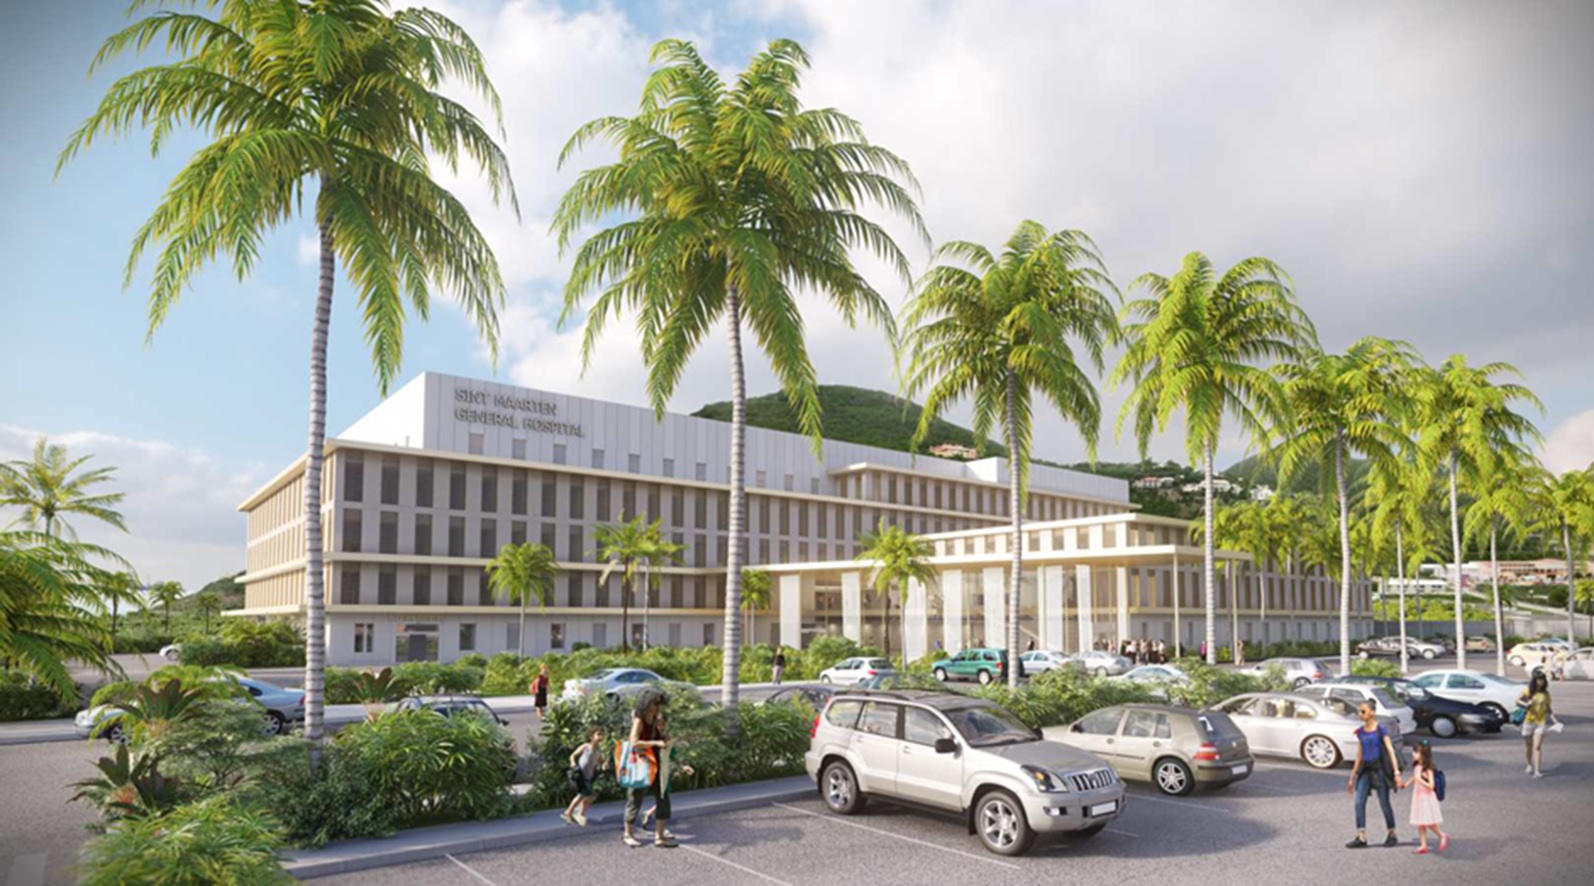 SMMC provides update on new hospital project